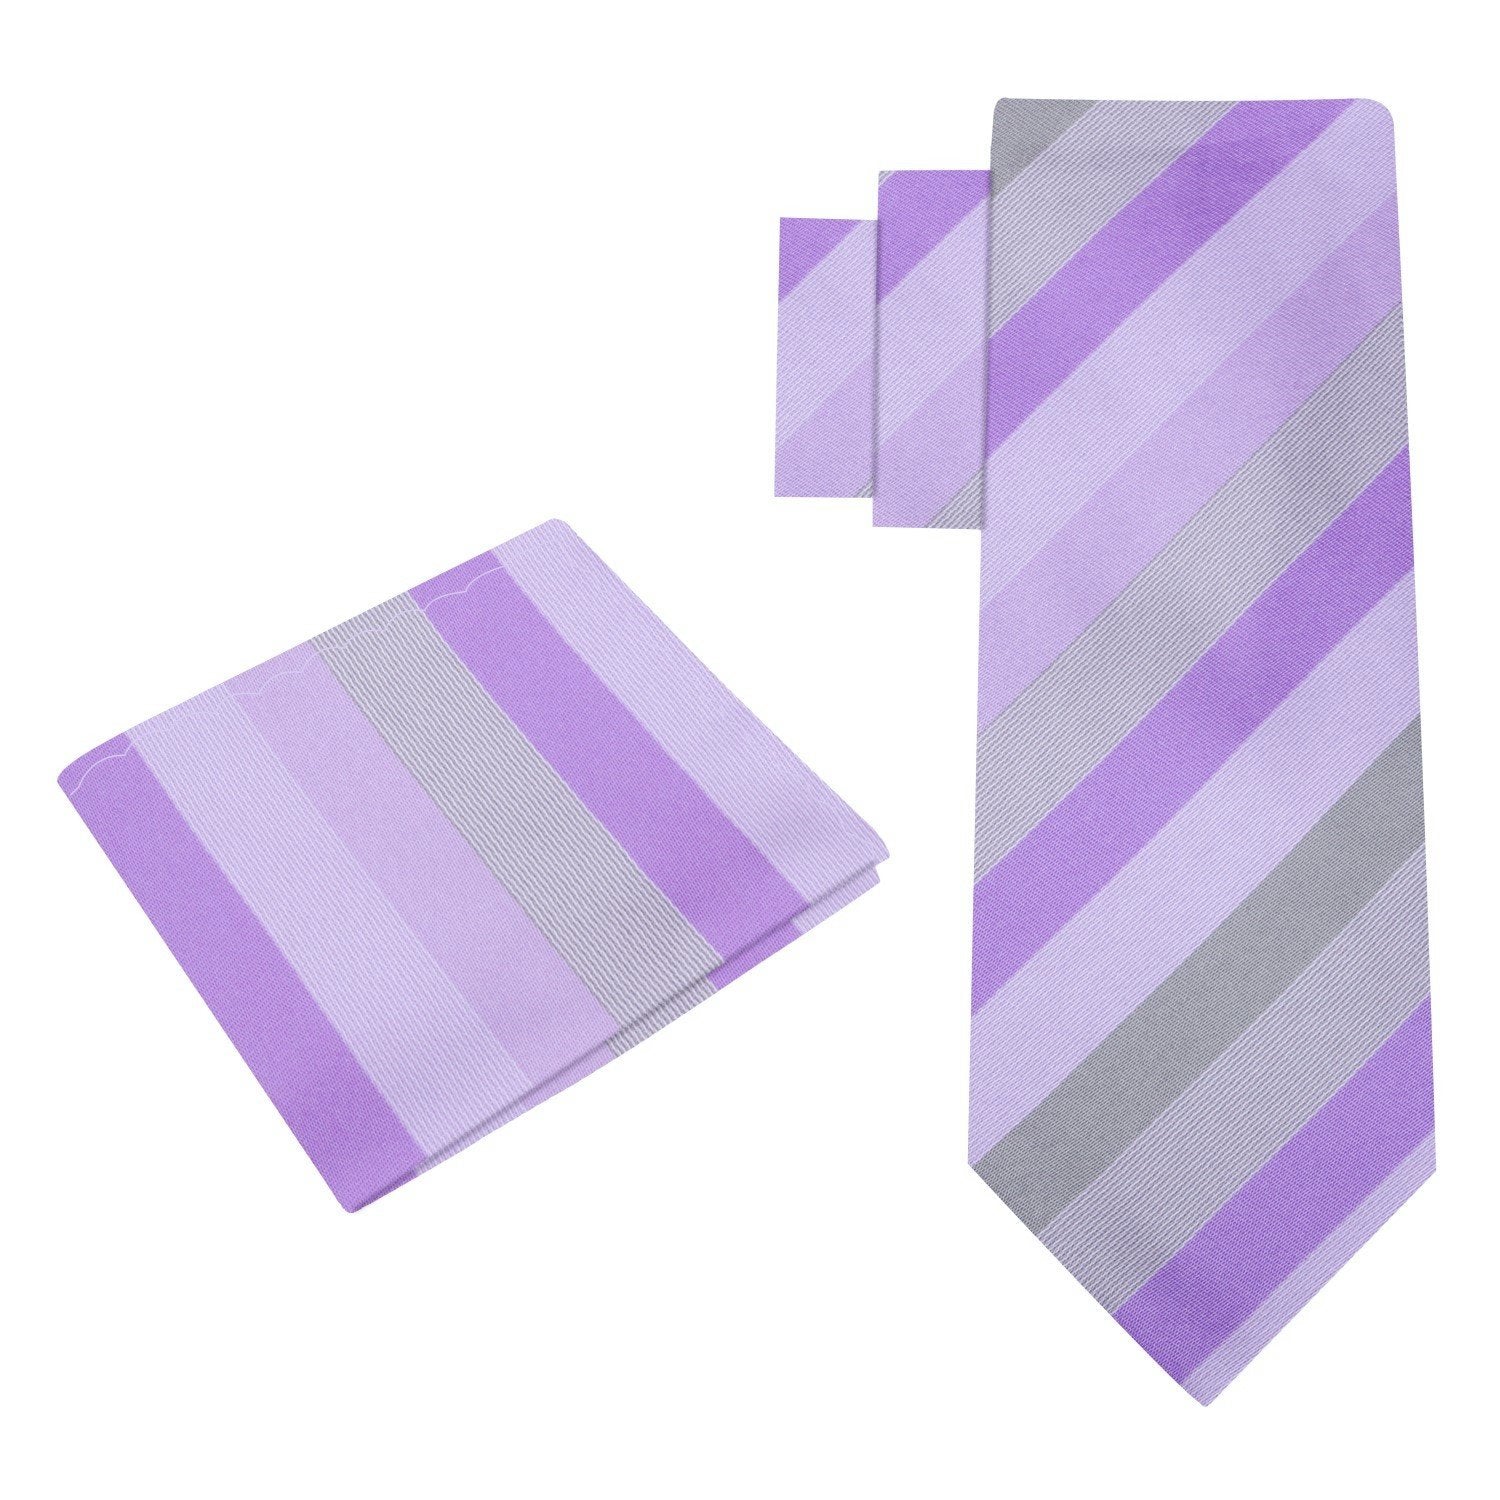 Alt View: Shades of Purple and Grey Stripe Tie and Pocket Square